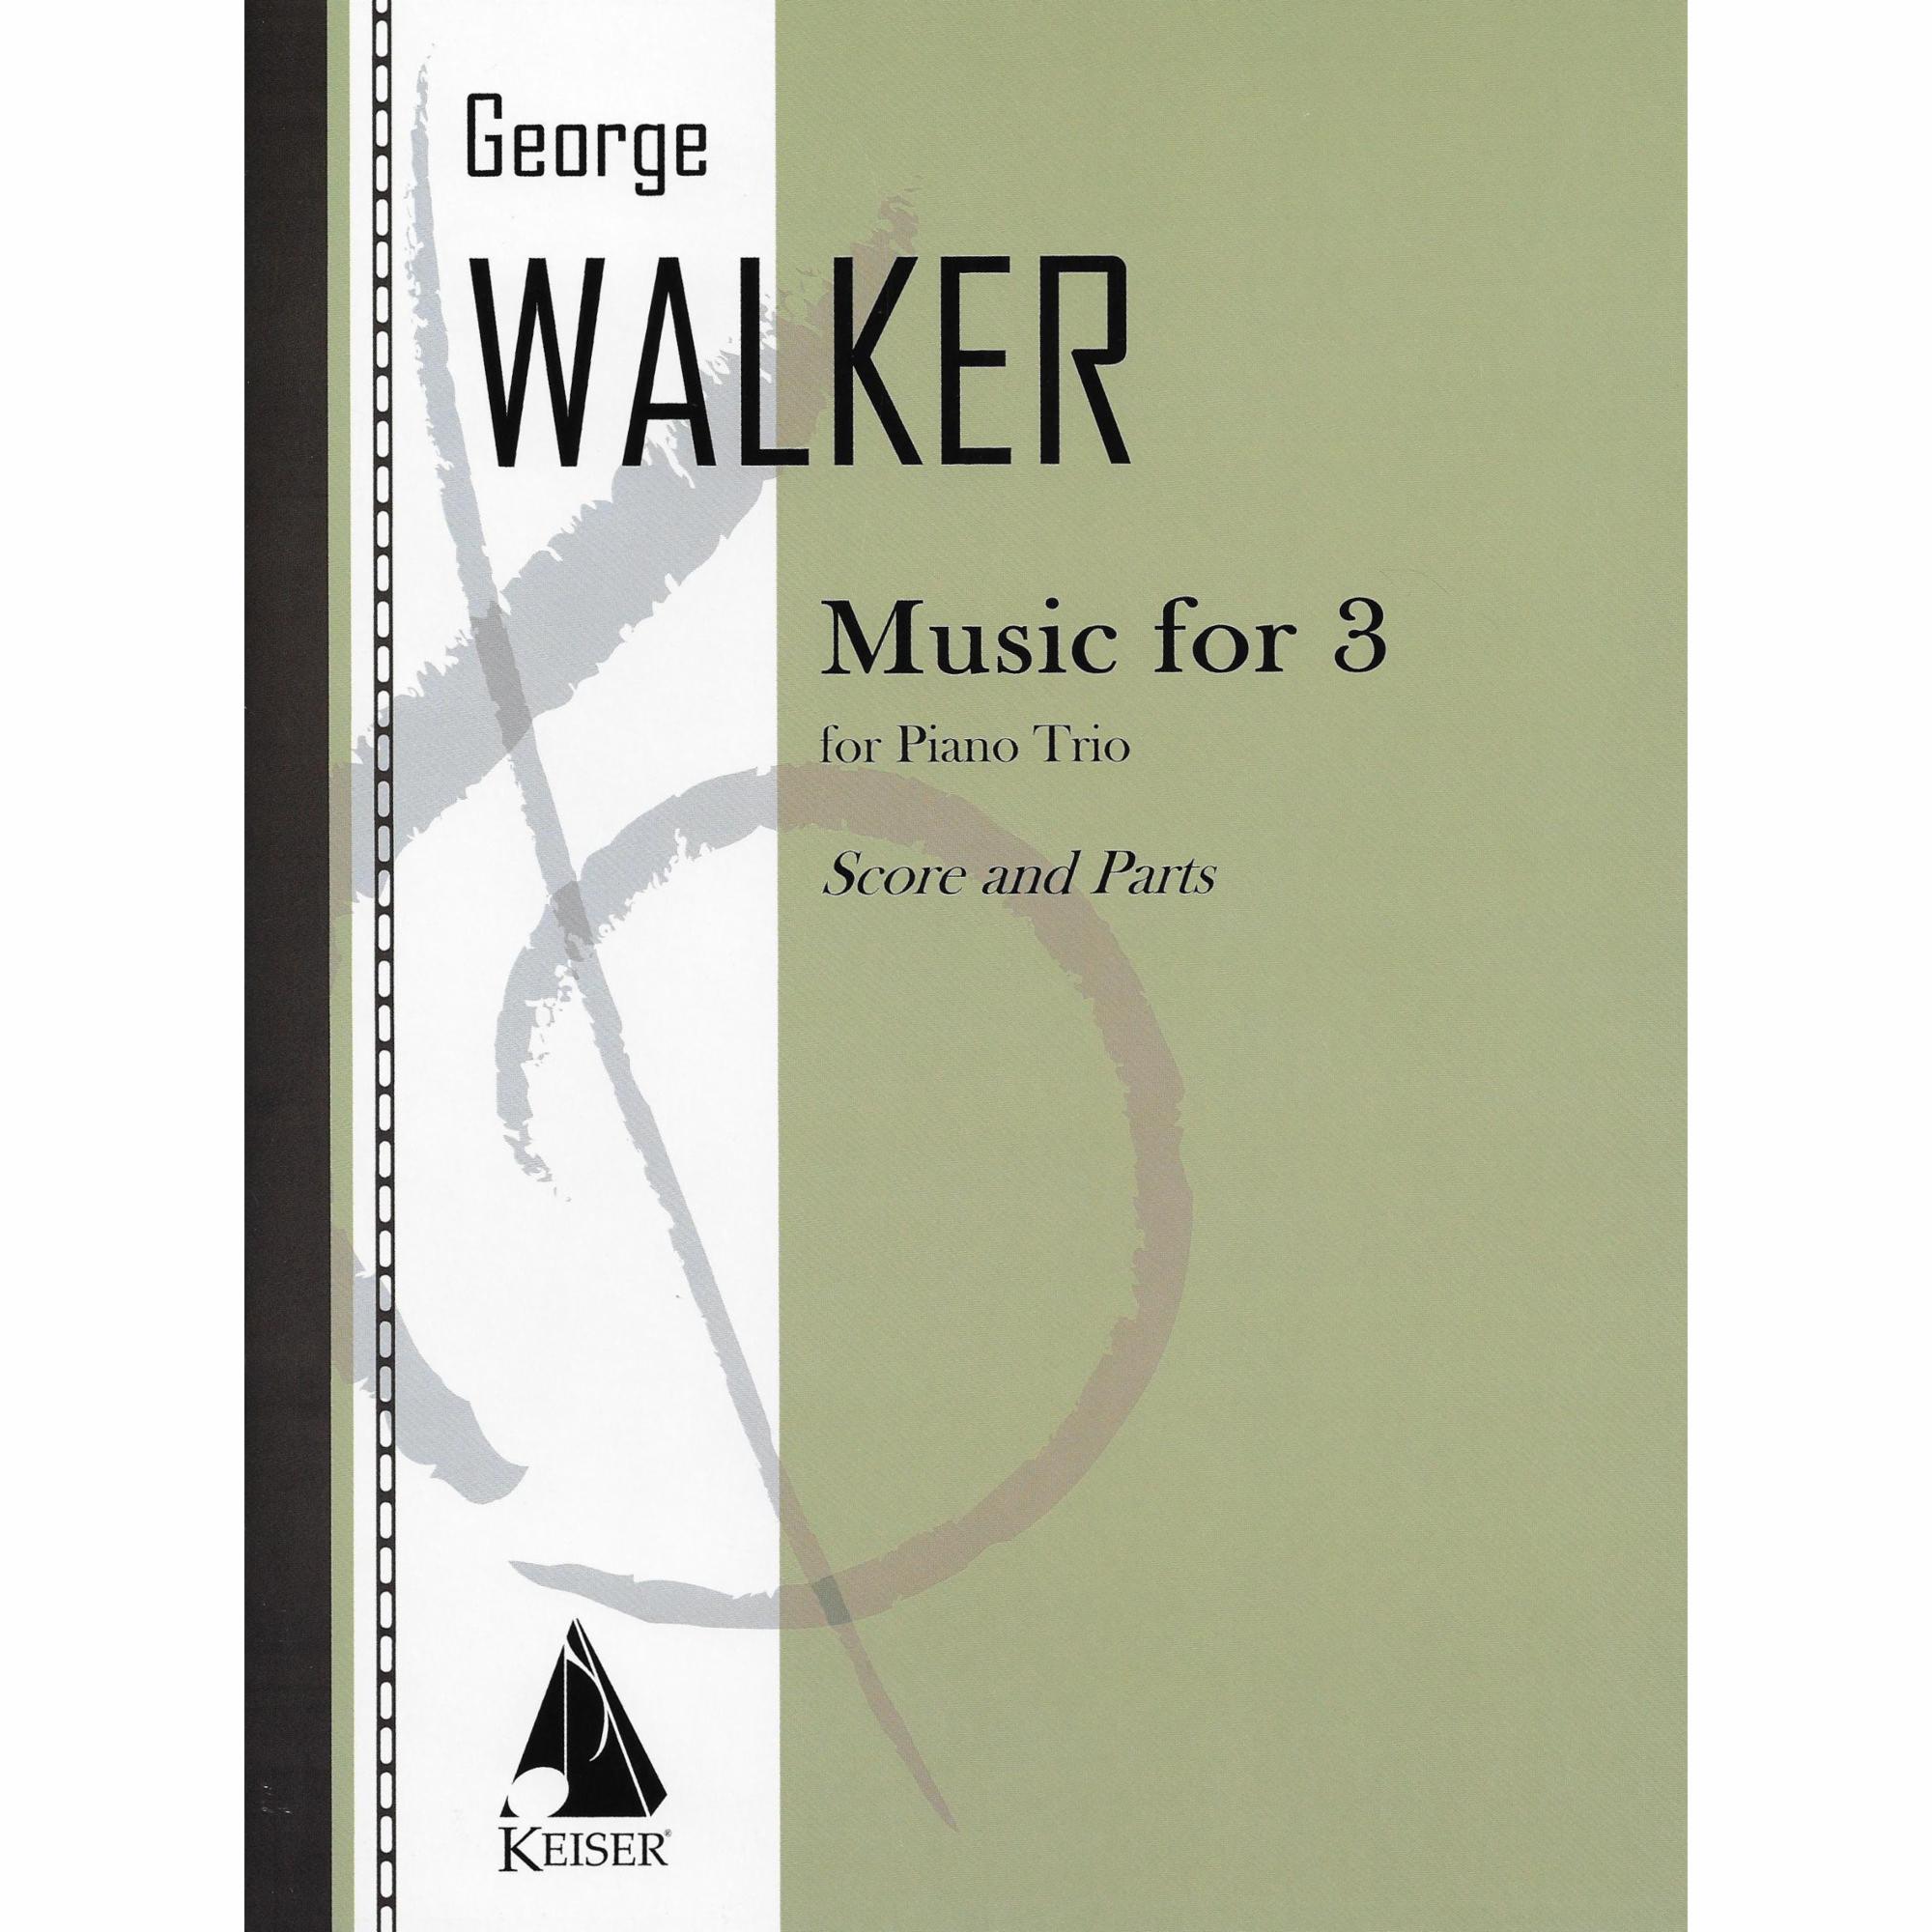 Walker -- Music for 3 for Piano Trio